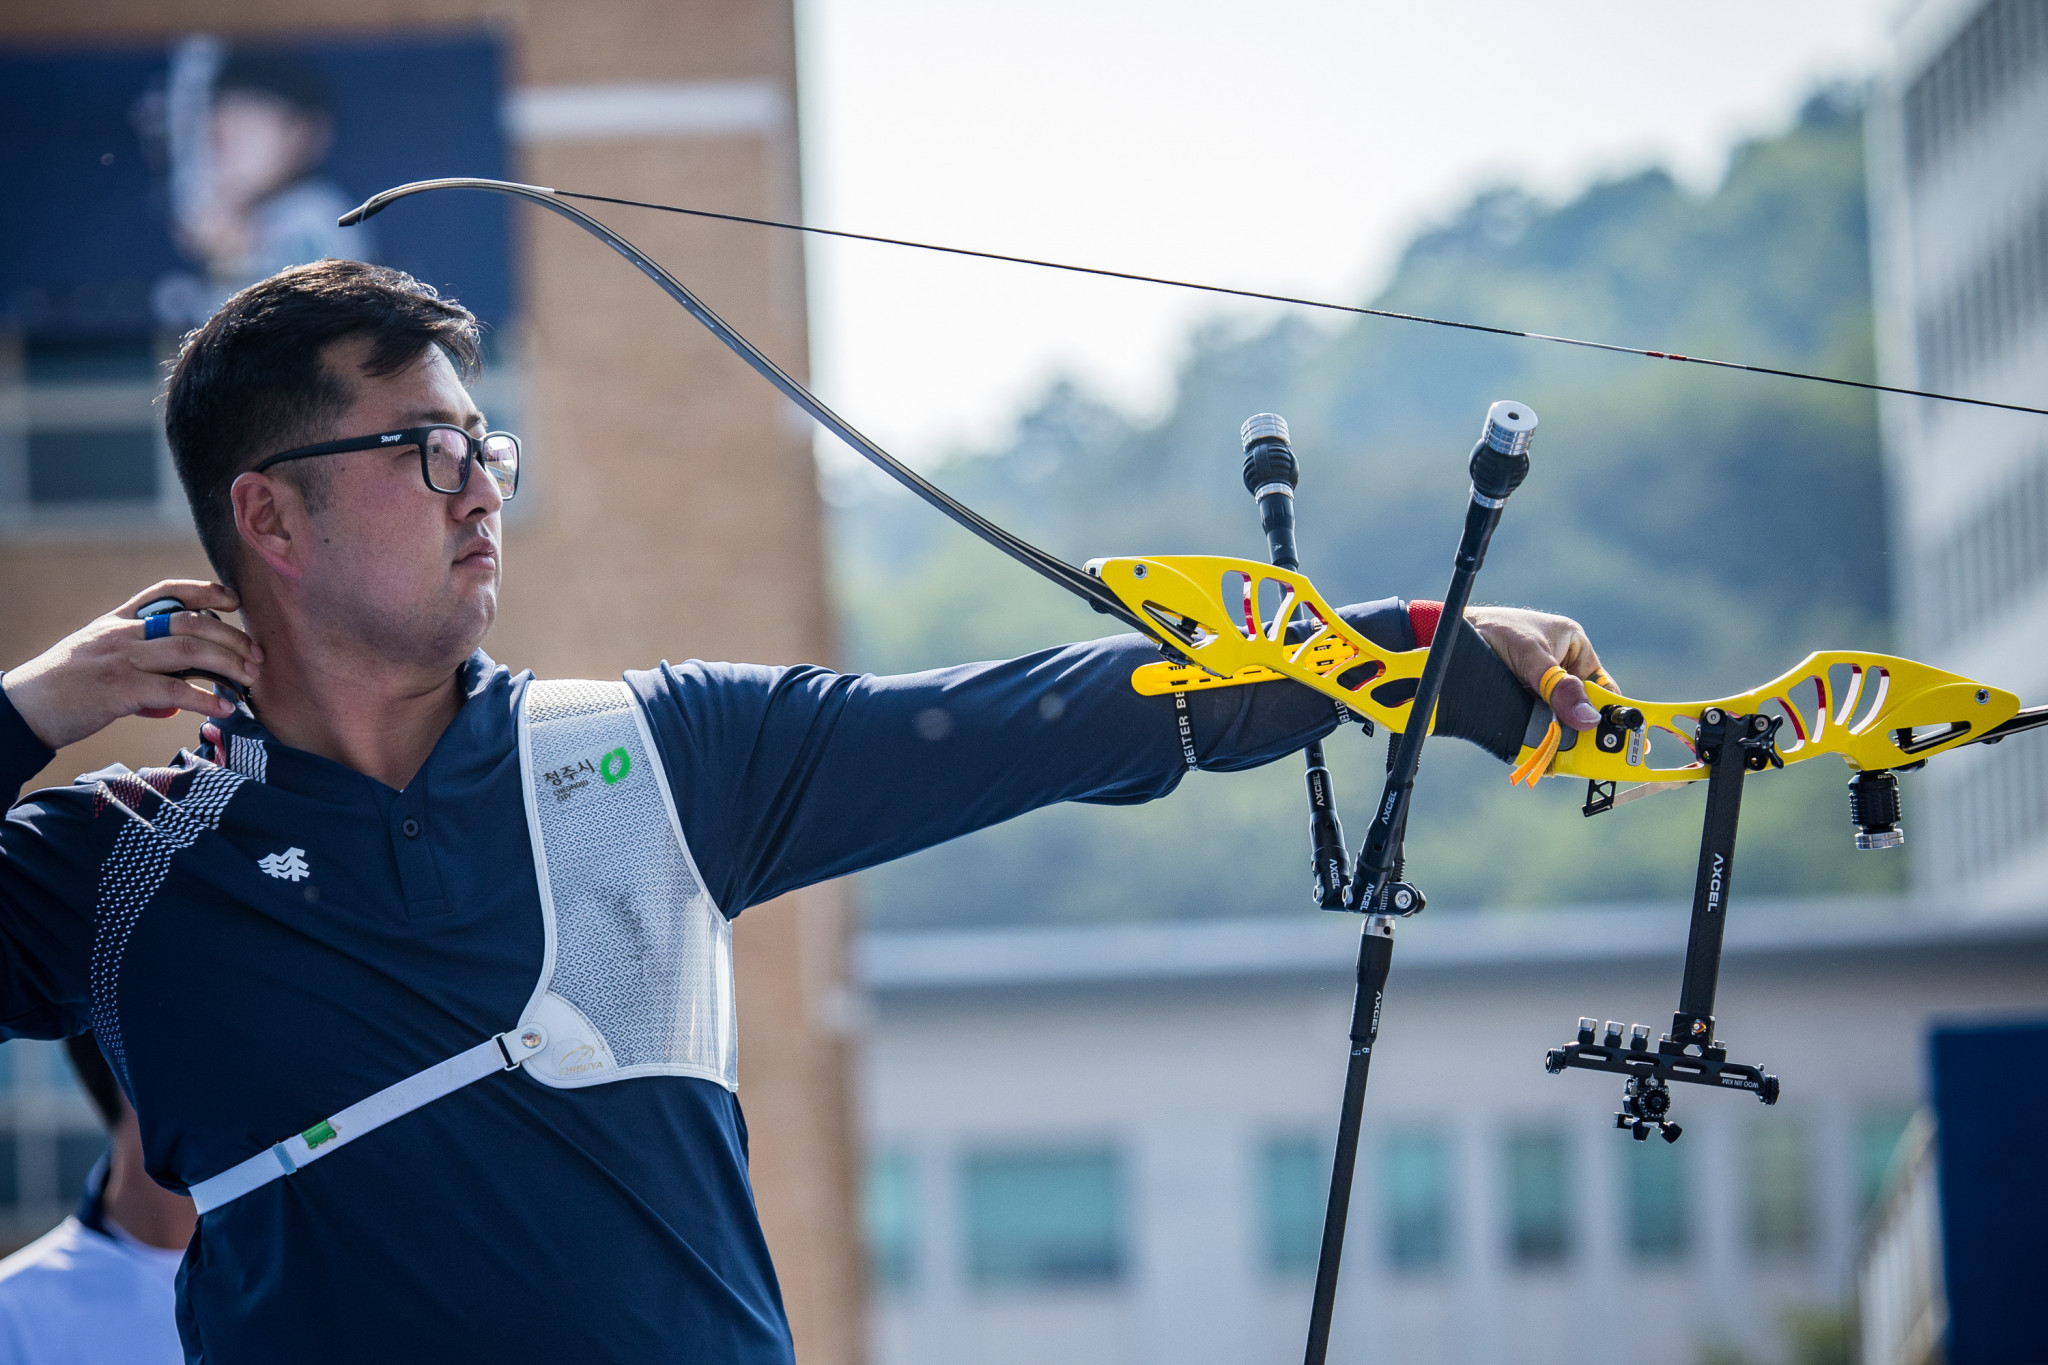 Kim Woo-jin of South Korea came out on top in the men's recurve event in Gwangju ©Getty Images